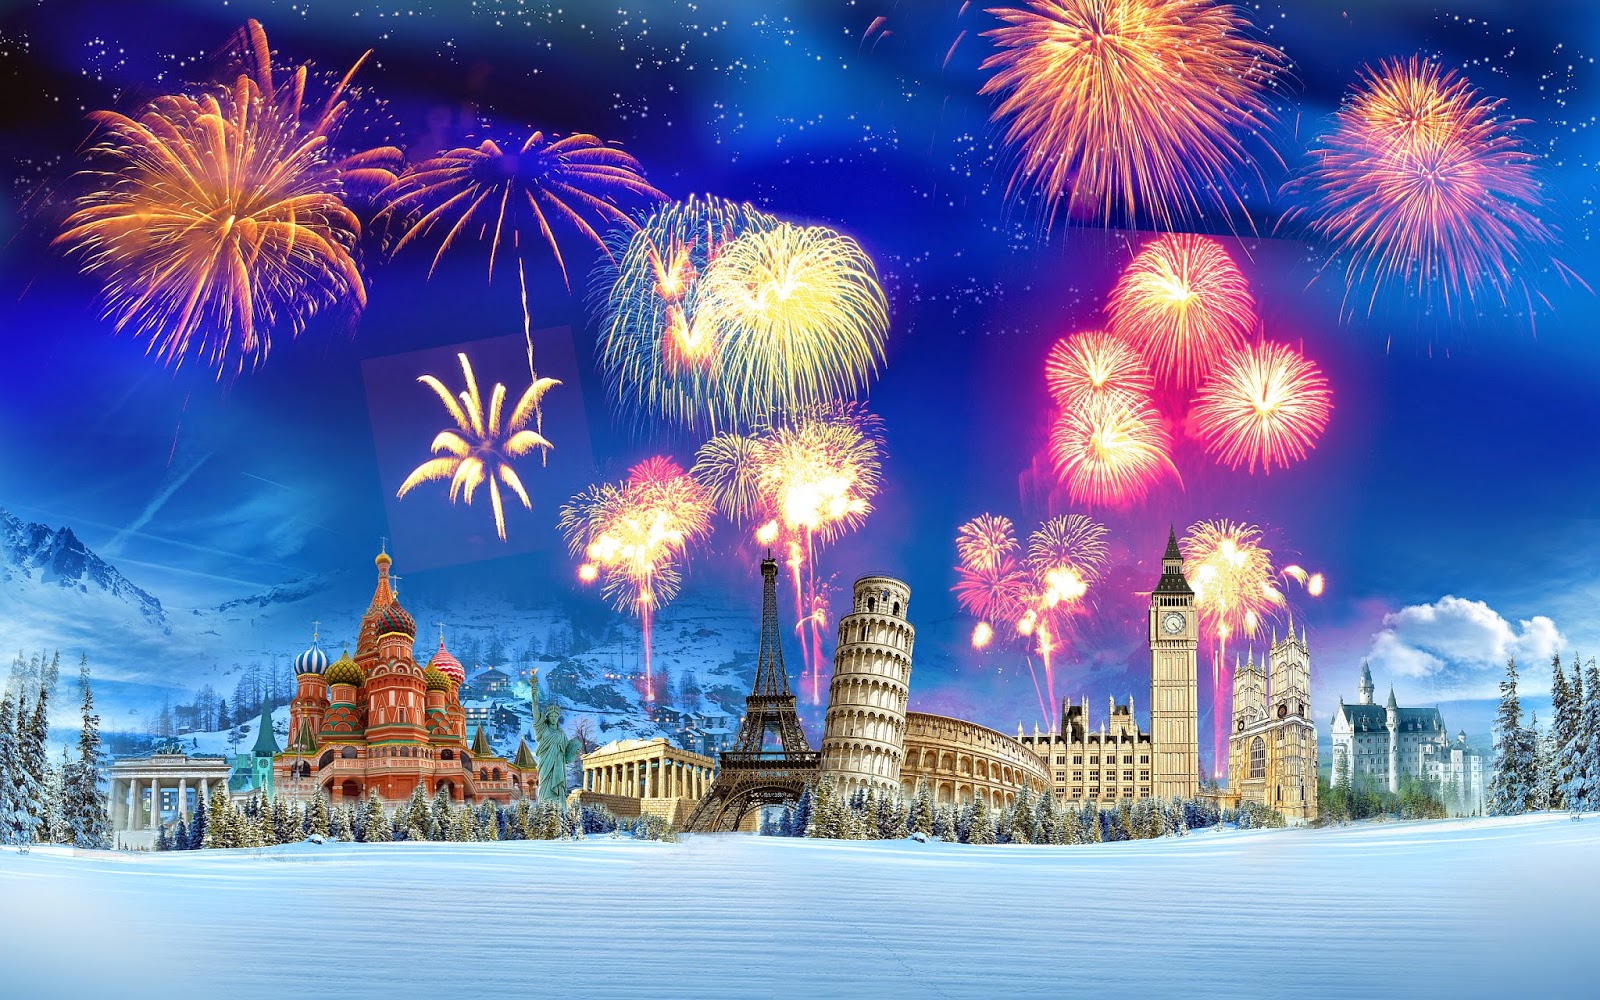 Happy New Year 2015 HD Wallpapers | Spicytec
 New Years Fireworks Wallpaper 2015